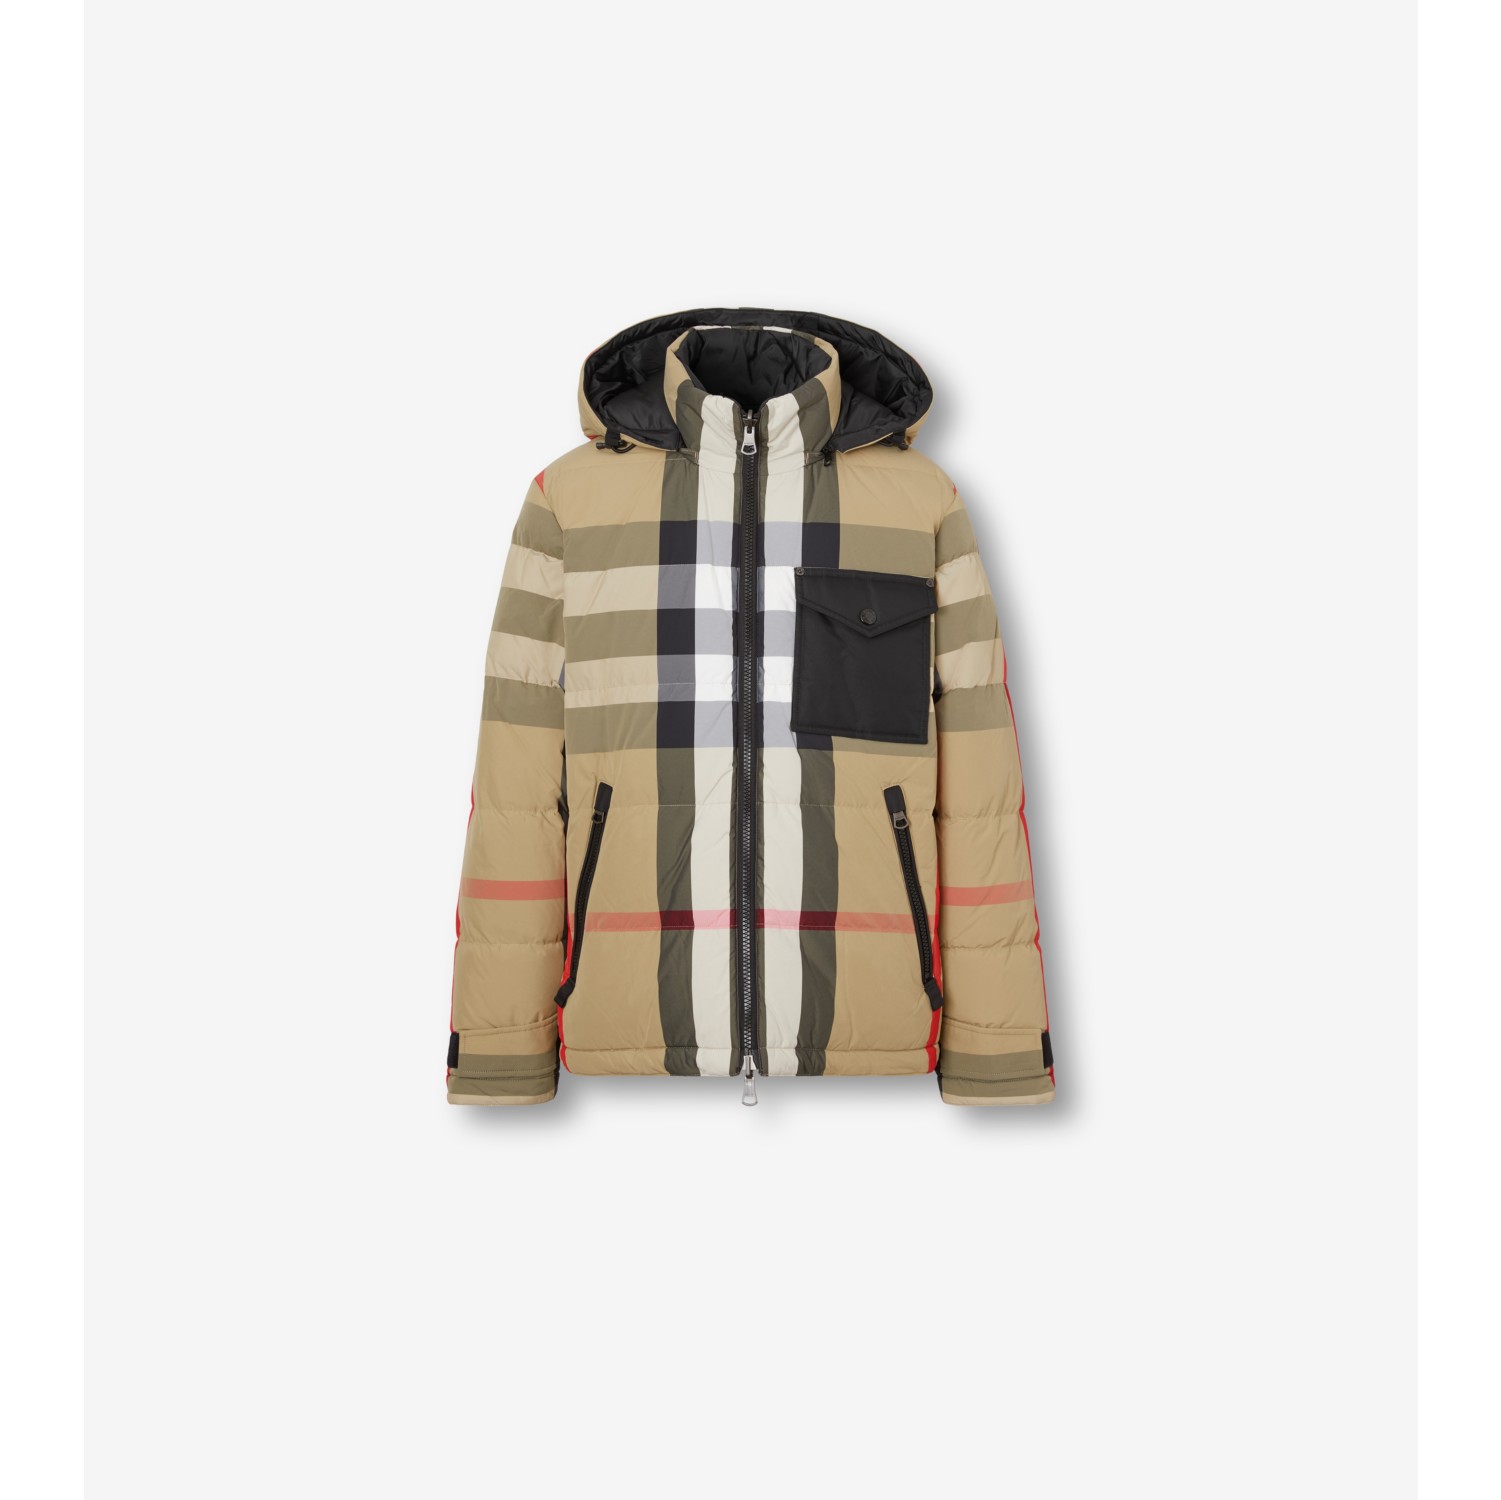 Reversible Check Puffer Jacket in Archive beige - Men | Burberry 